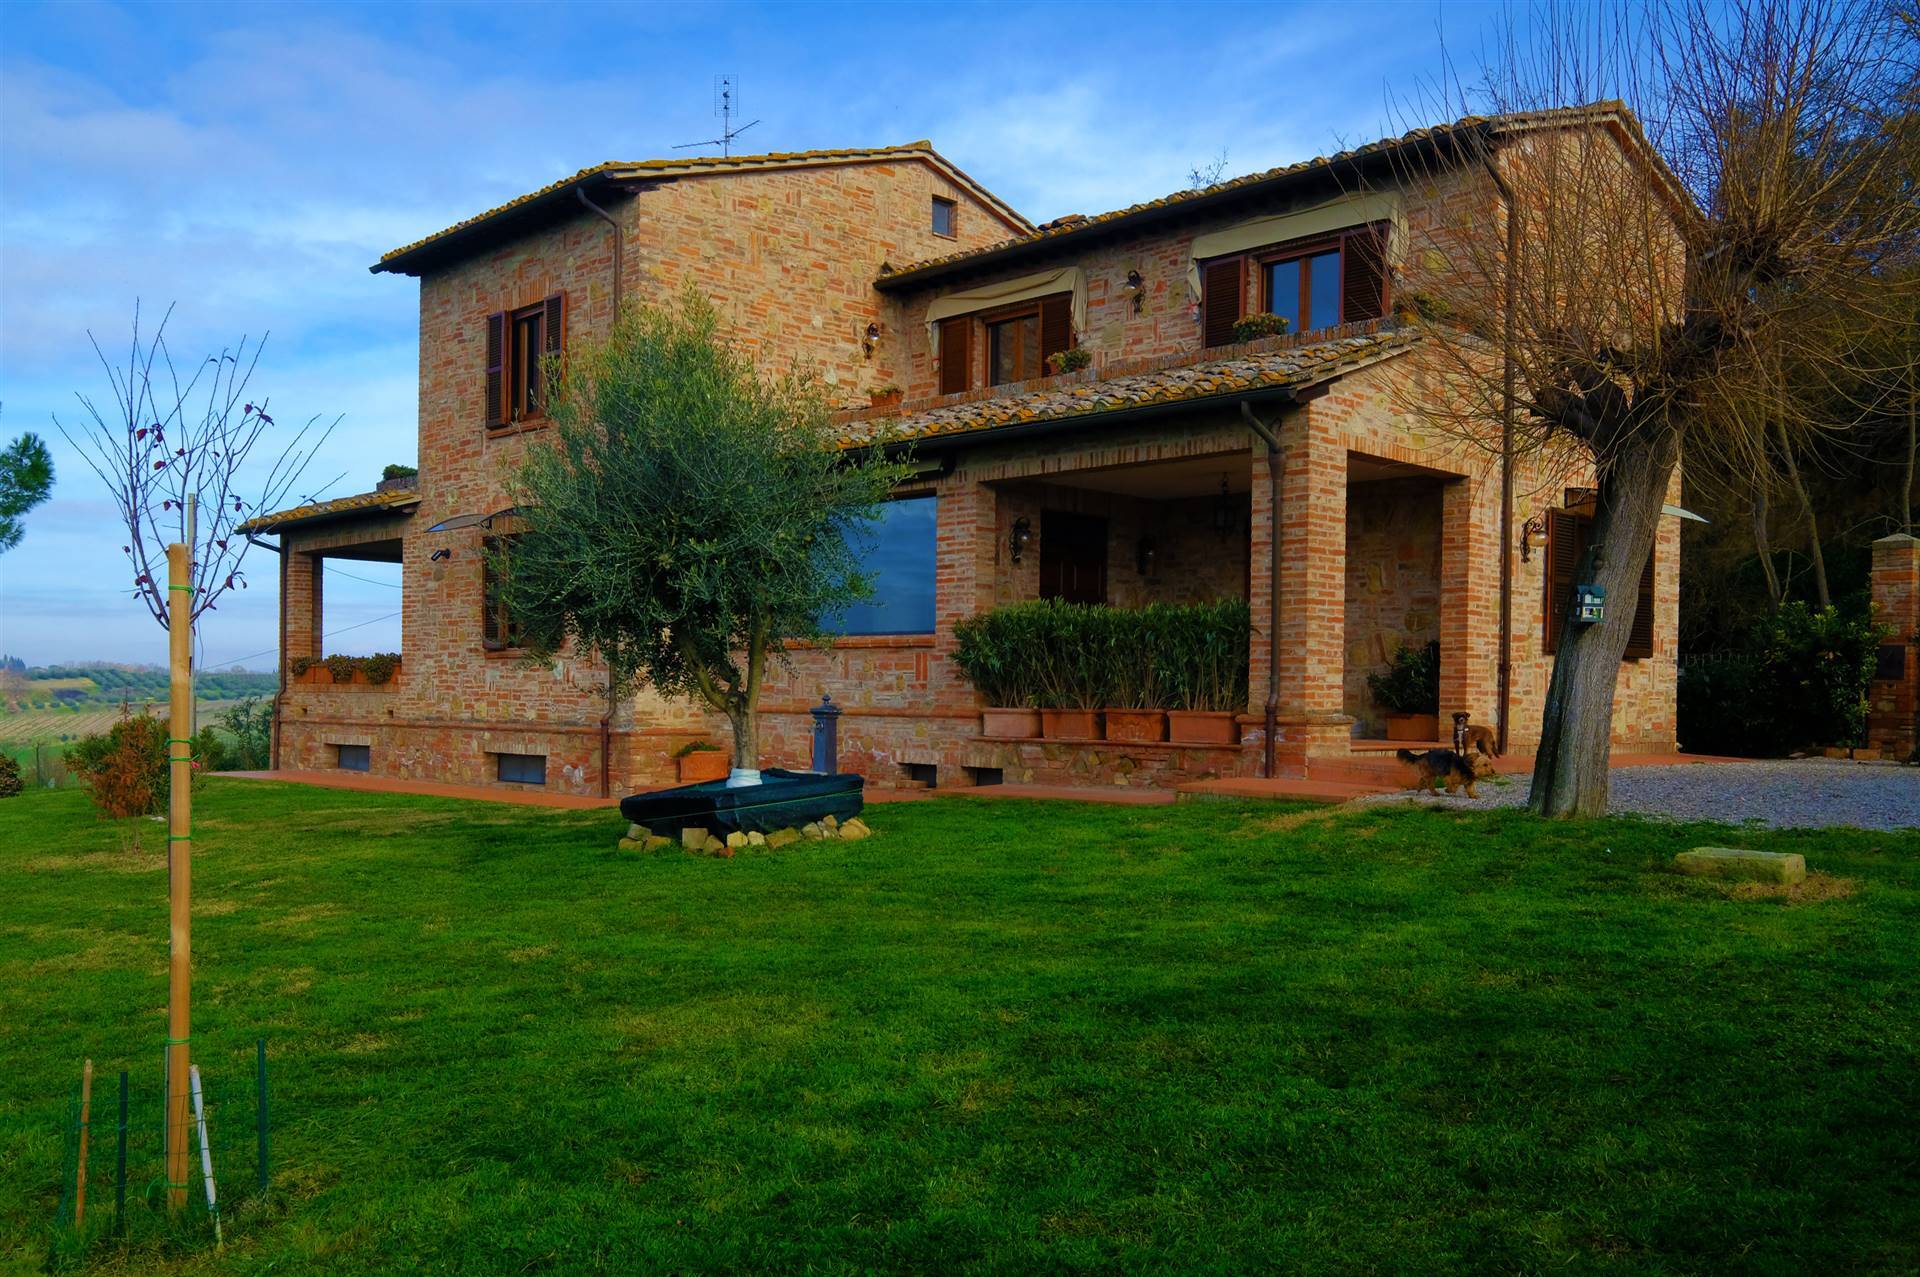 For sale cottage in quiet zone Montepulciano Toscana